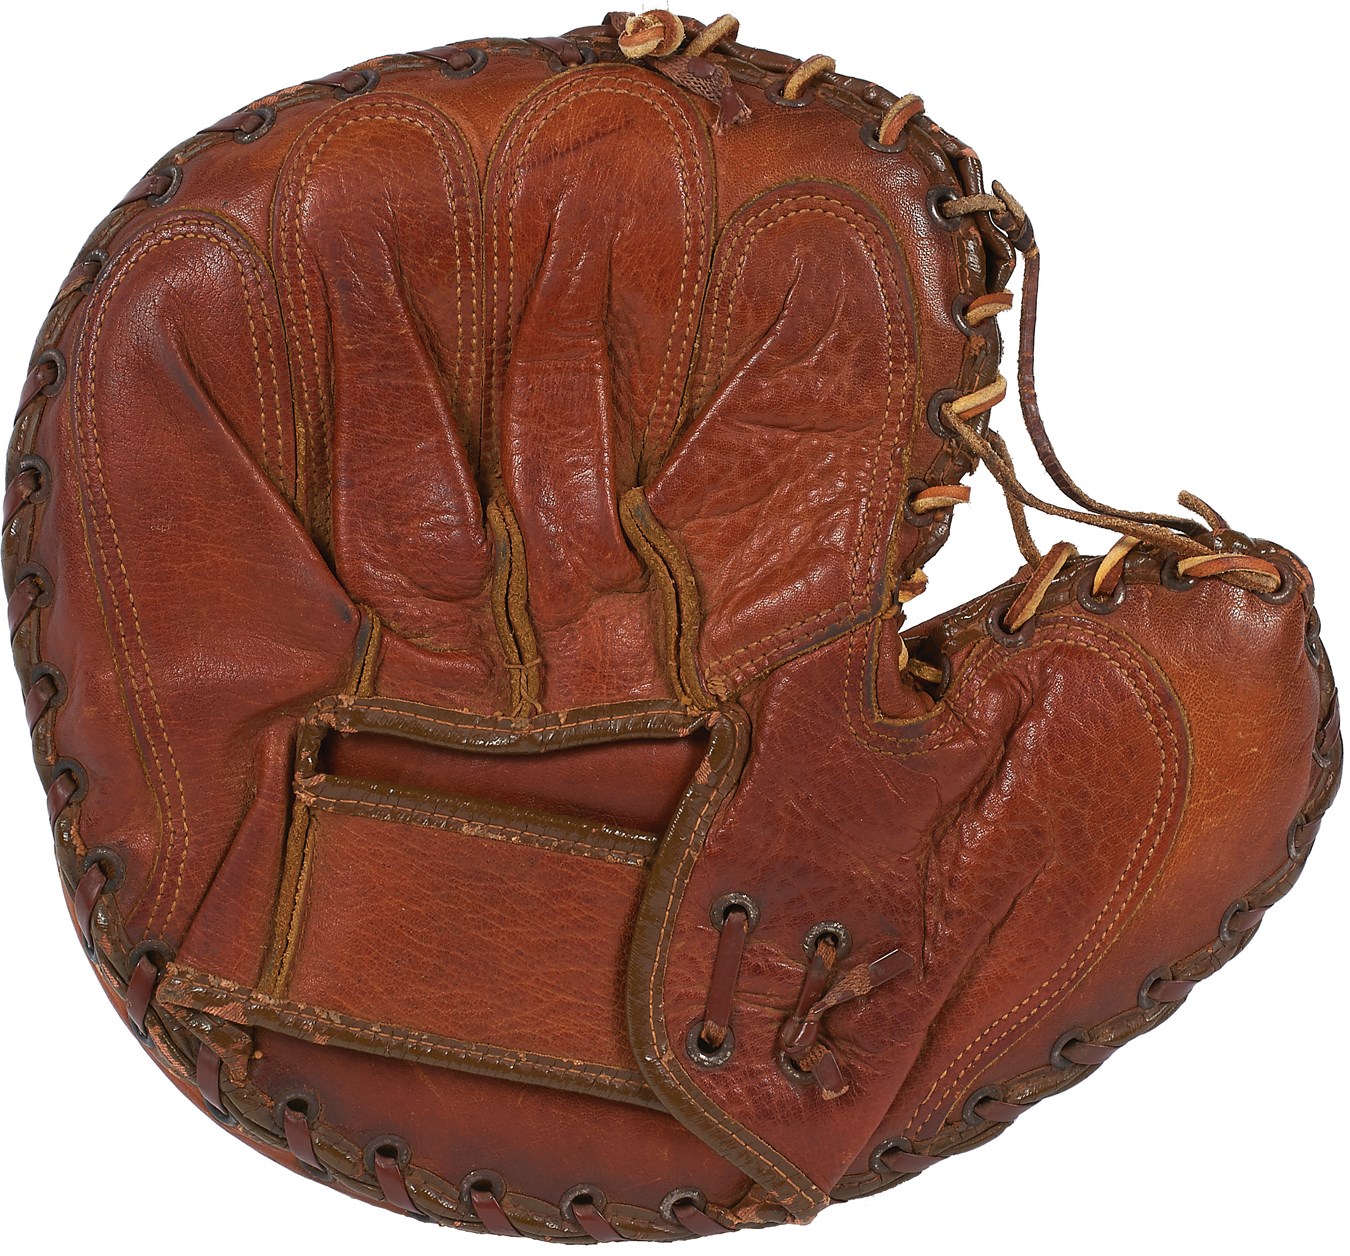 NY Yankees, Giants & Mets - 1938 New York Yankees Signed Bill Dickey Model Catcher's Mitt w/ Lou Gehrig (PSA)